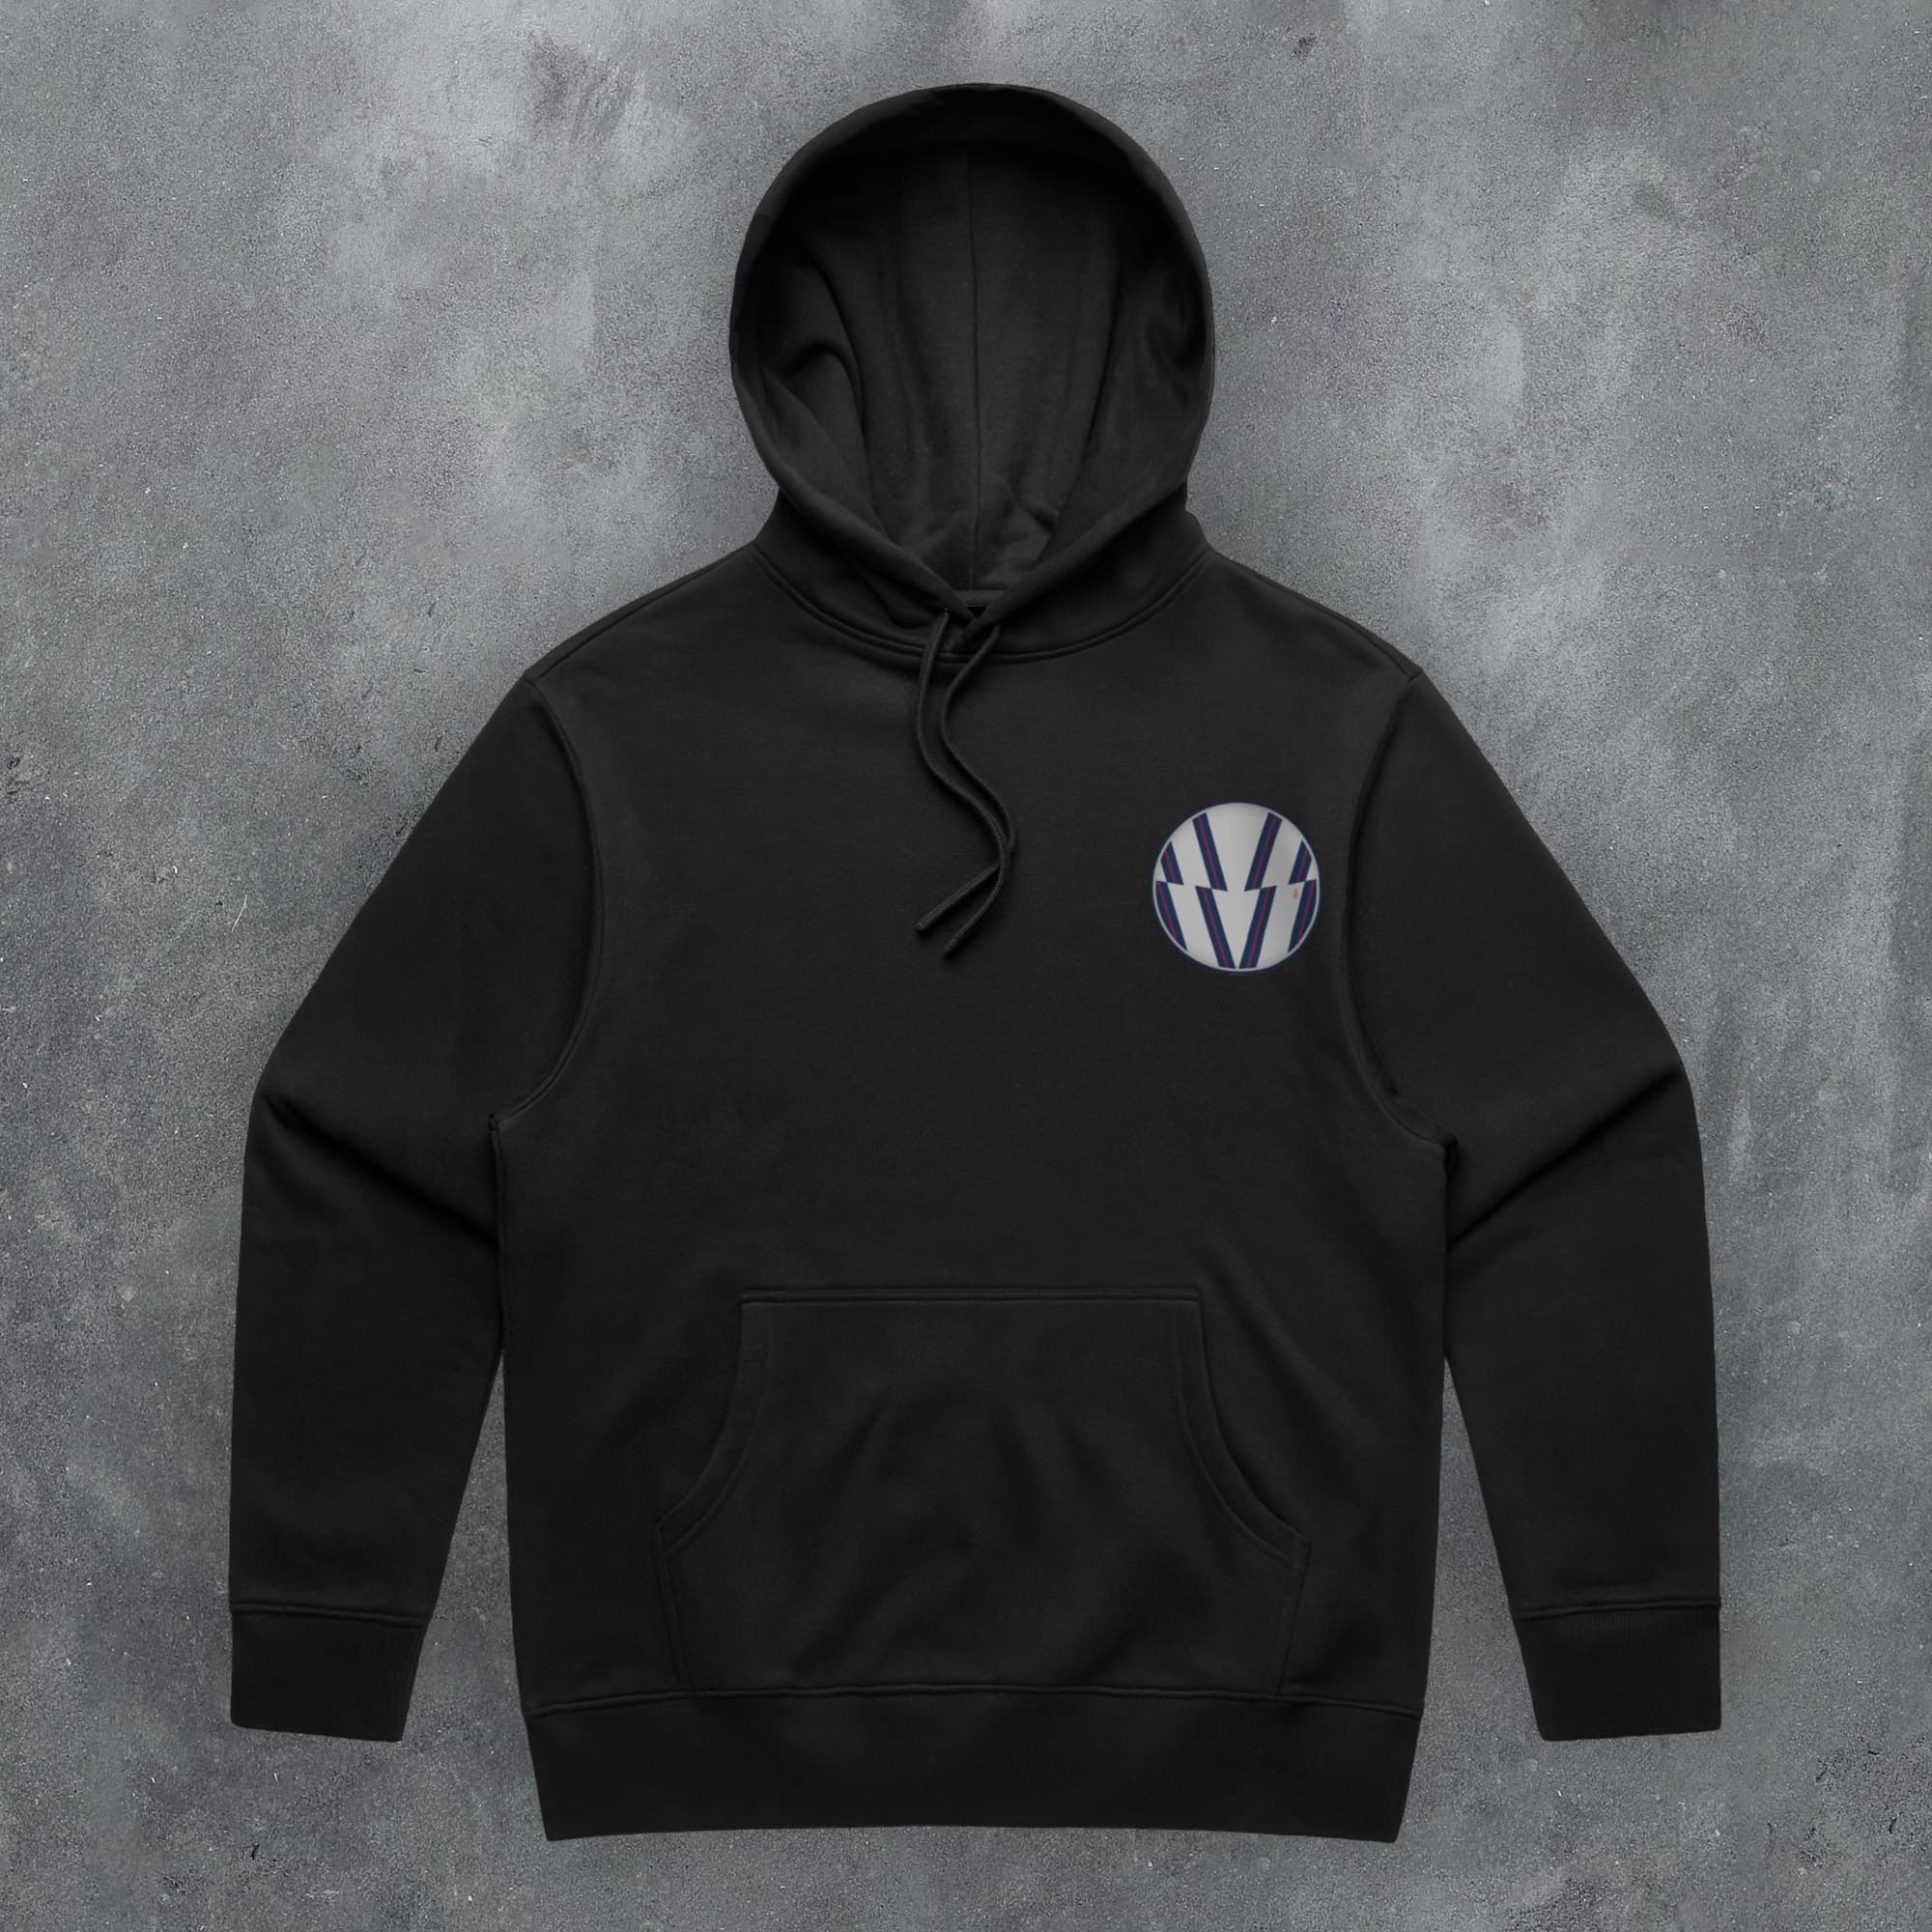 a black hoodie with the word v on it